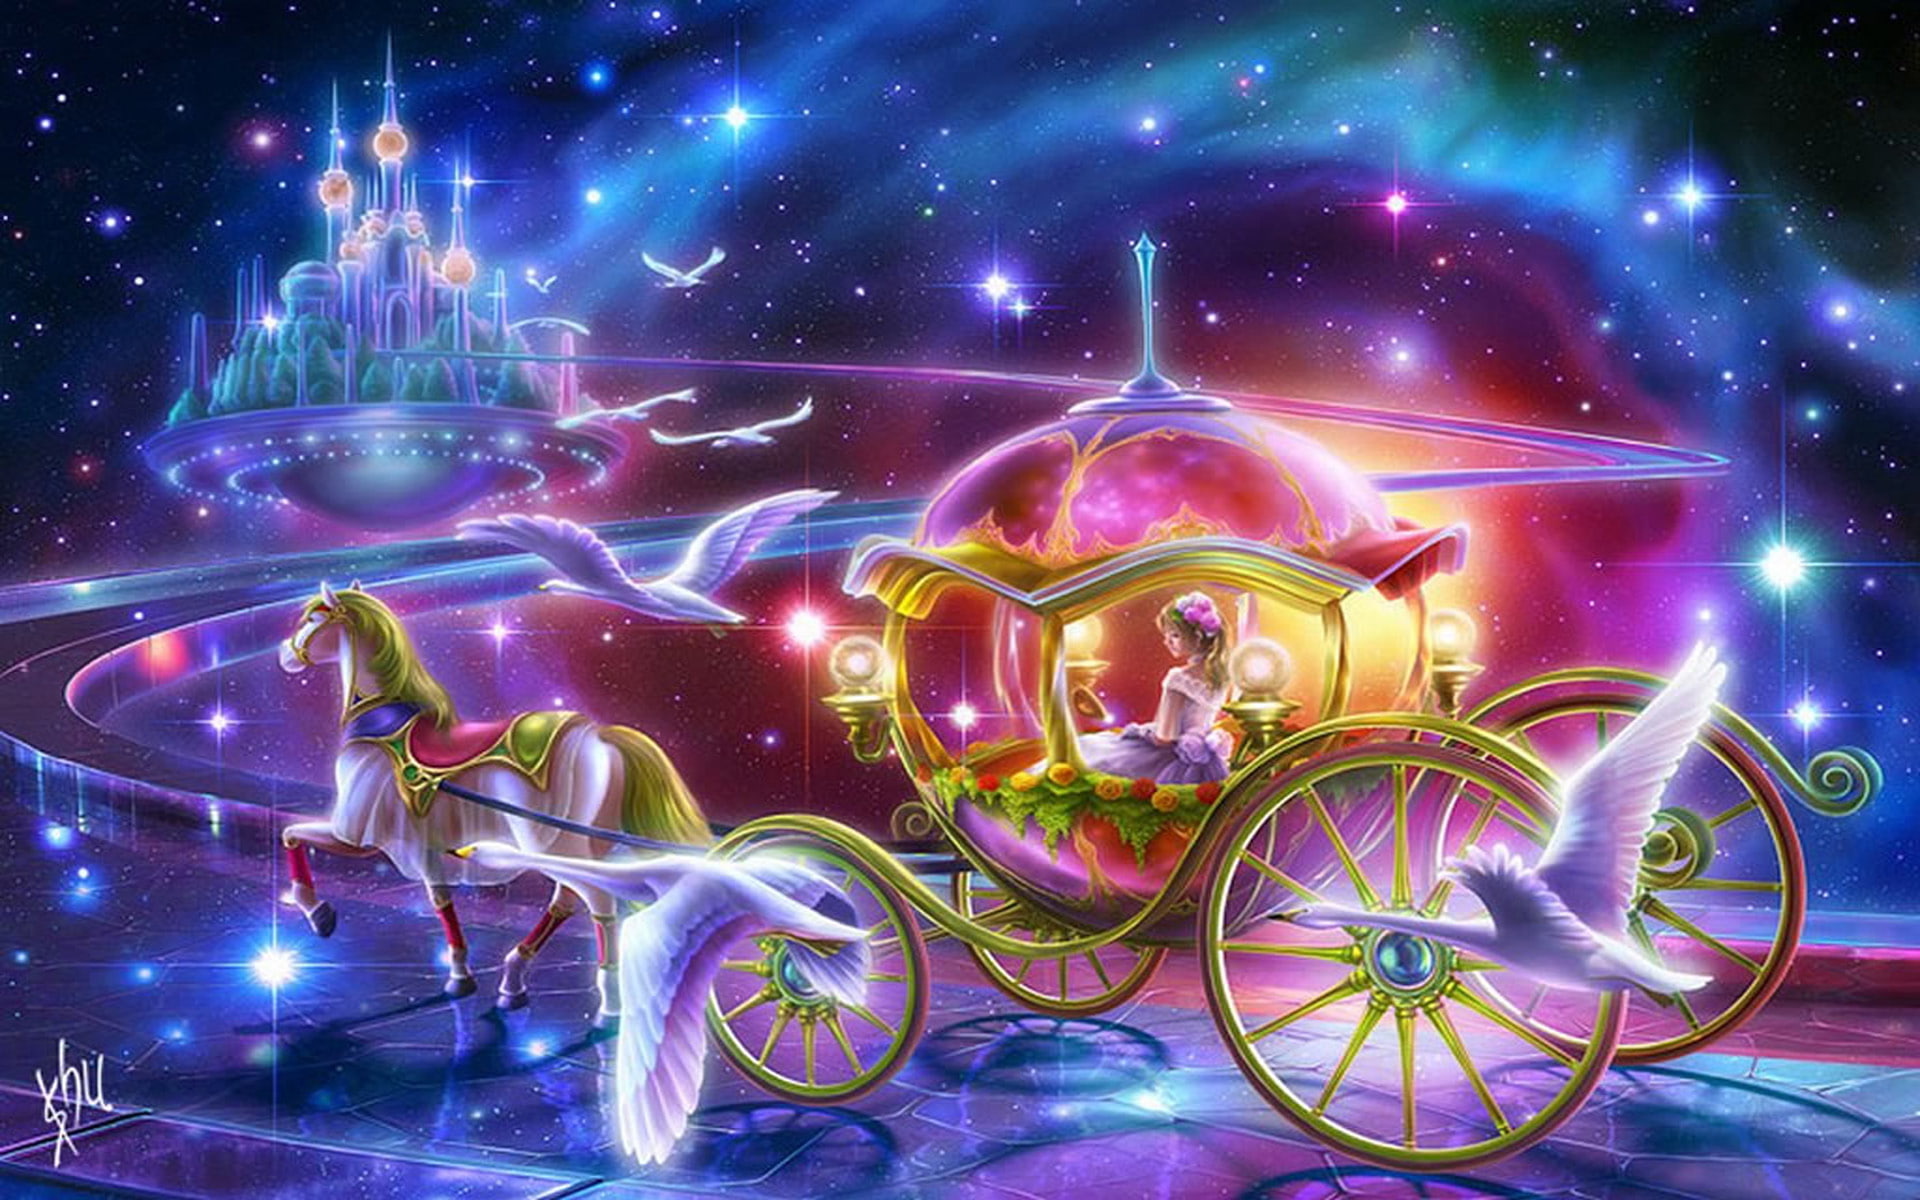 Royal Chaotic With Cinderella Direct To Royal Palace Desktop Hd Wallpaper For Mobile Phones Tablet And Pc 1920×1200